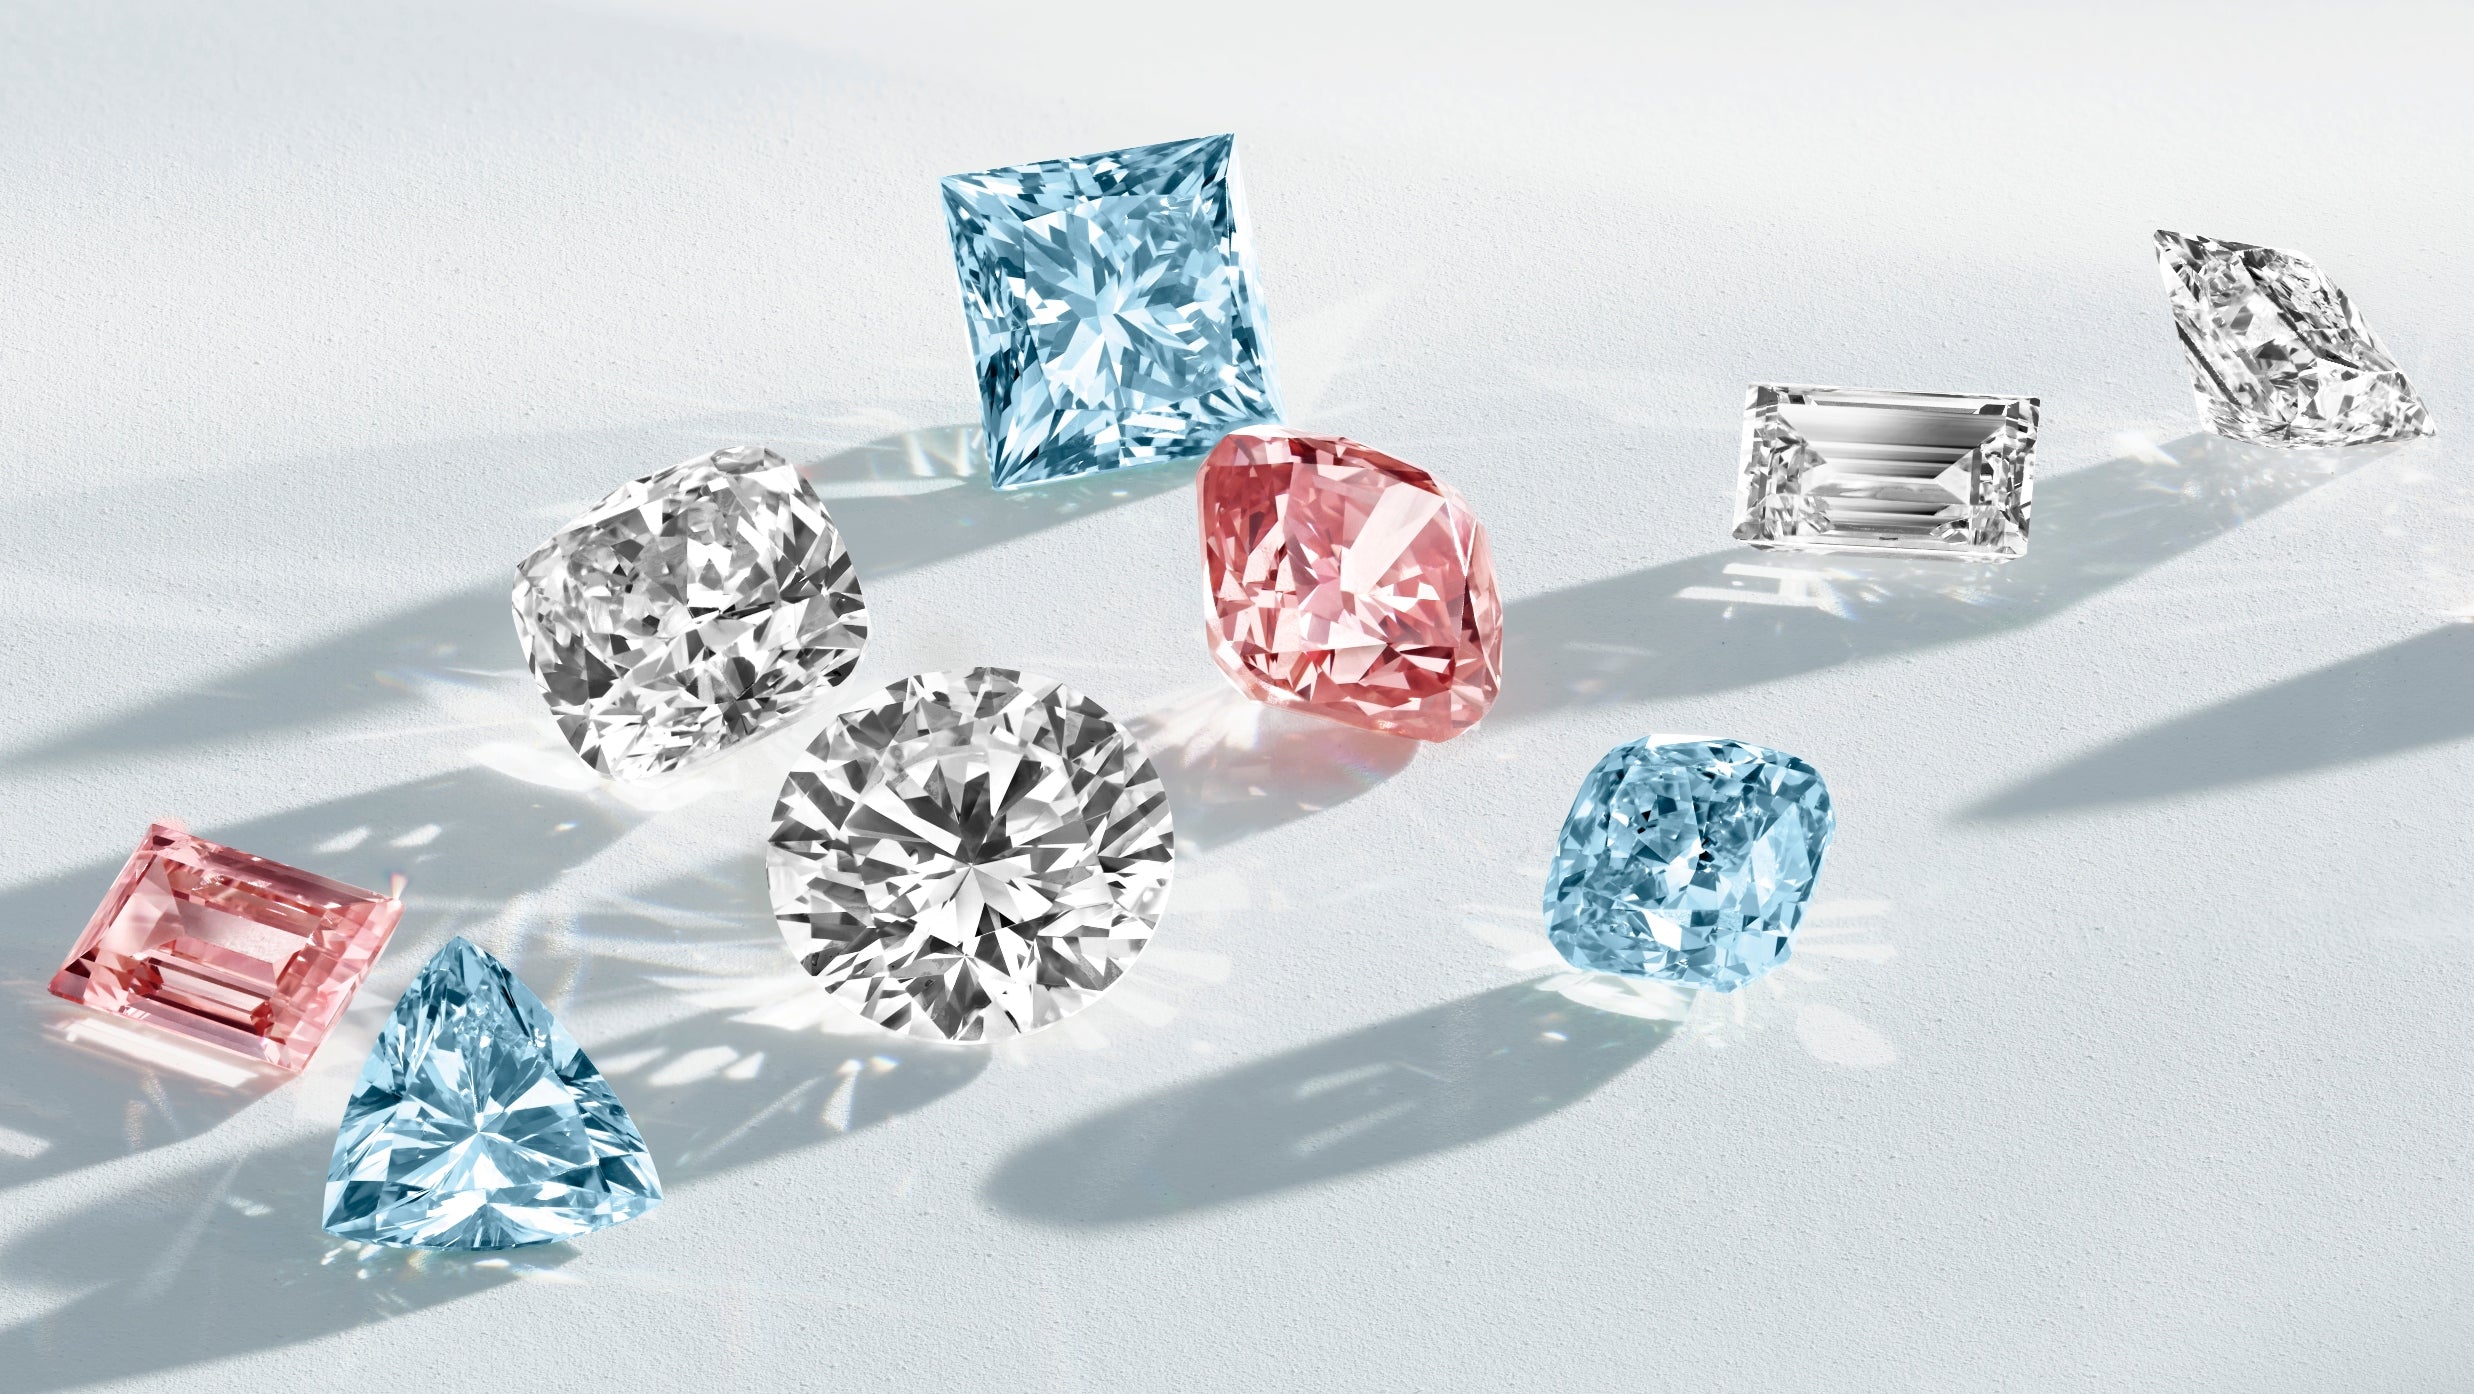 About our-lab-grown diamonds